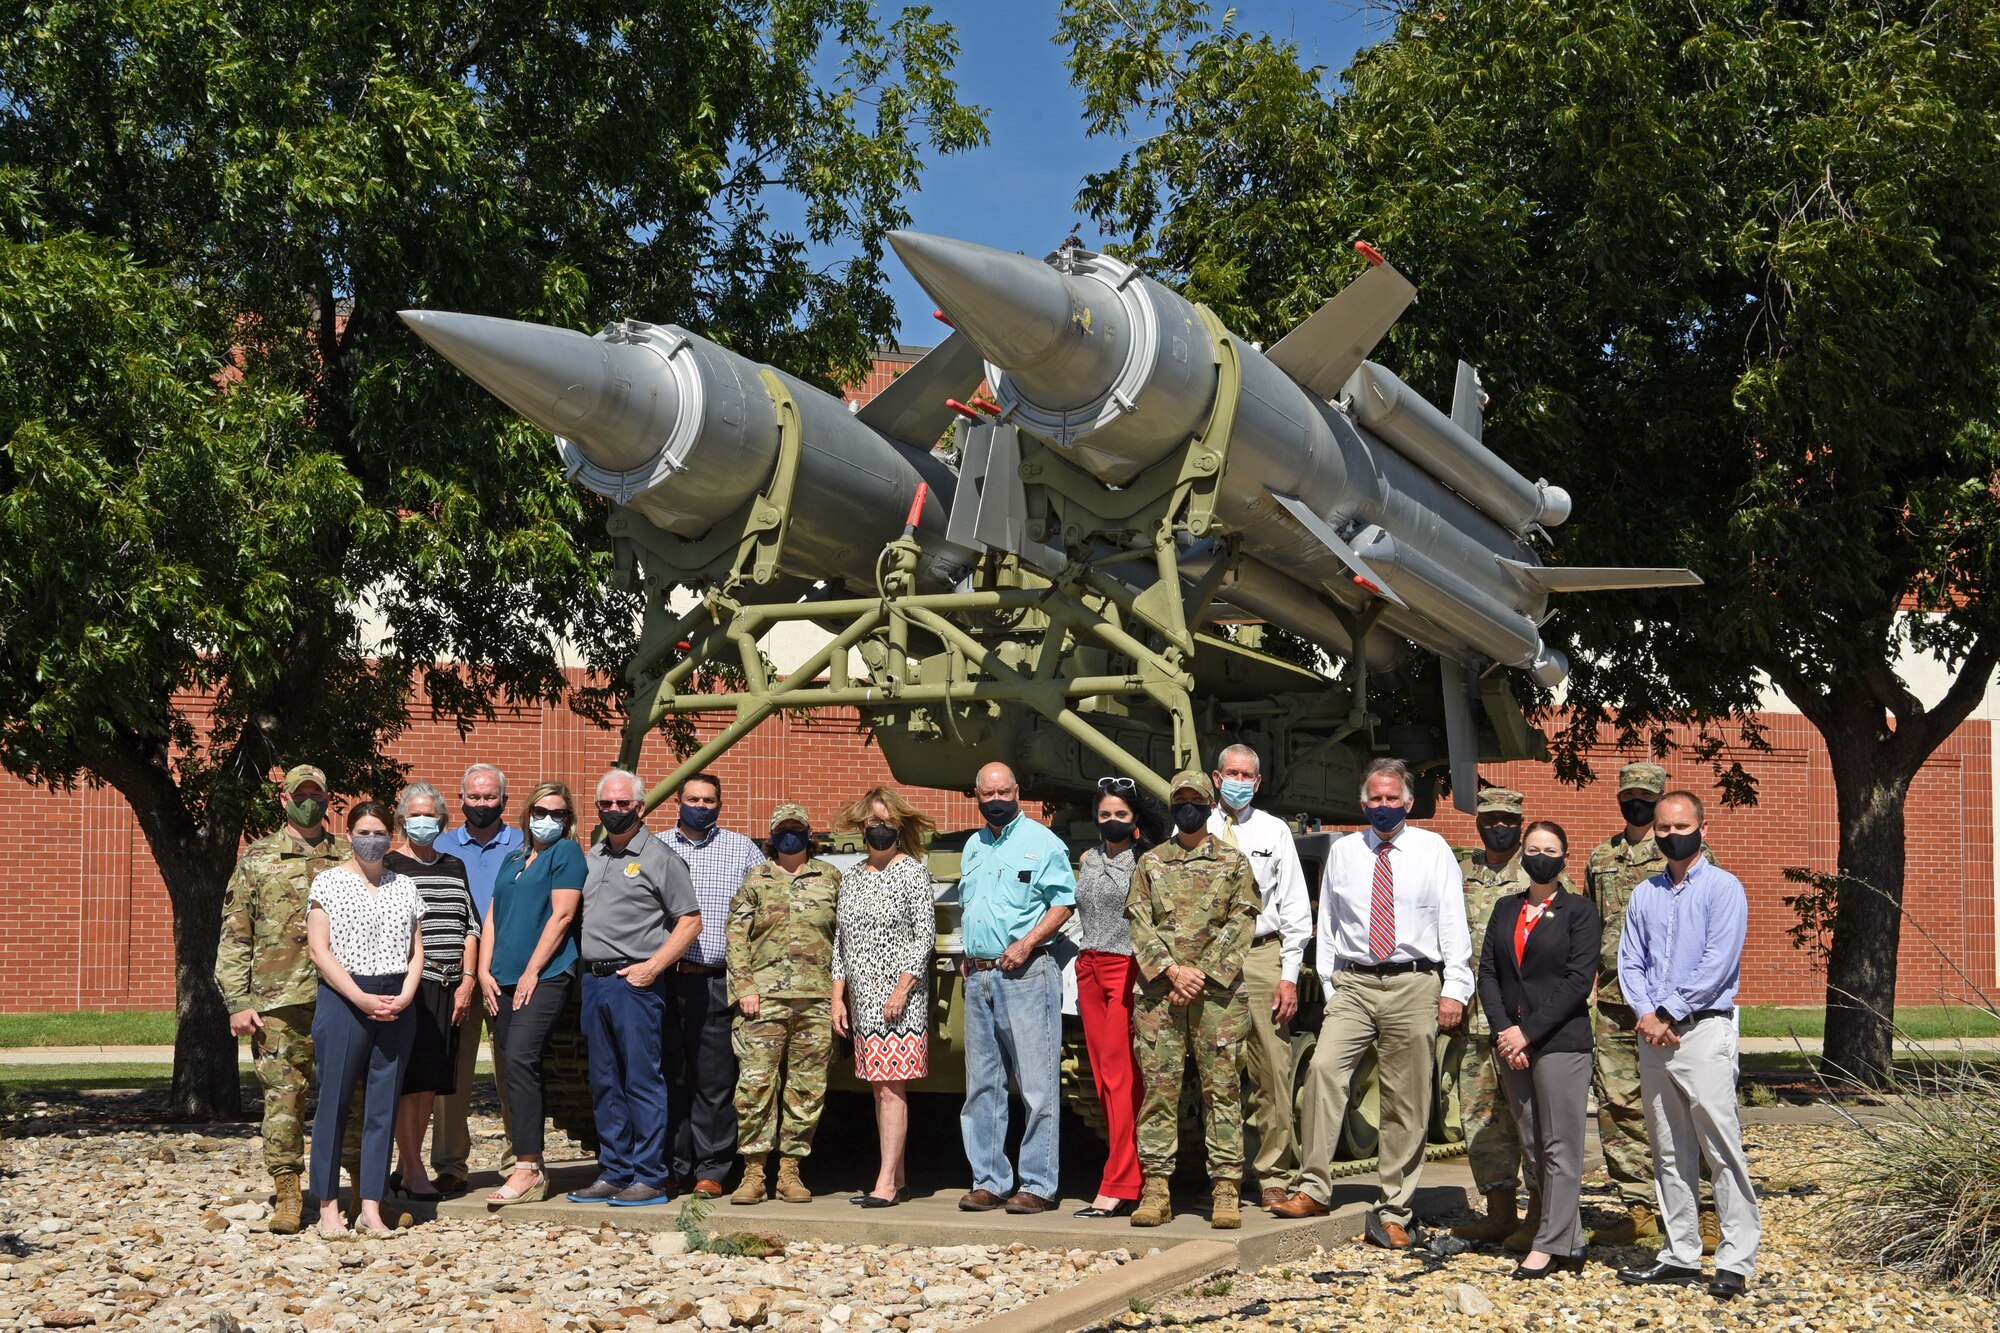 San Angelo civic leaders and Goodfellow Air Force Base leadership pose for a photo in front of the SA-4 Ganef on Goodfellow Air Force Base, Texas, Aug. 24, 2021. The SA-4 Ganef was a surface to air missile system and is used as a static display to enhance training on base.  (U.S. Air Force photo by Senior Airman Abbey Rieves)